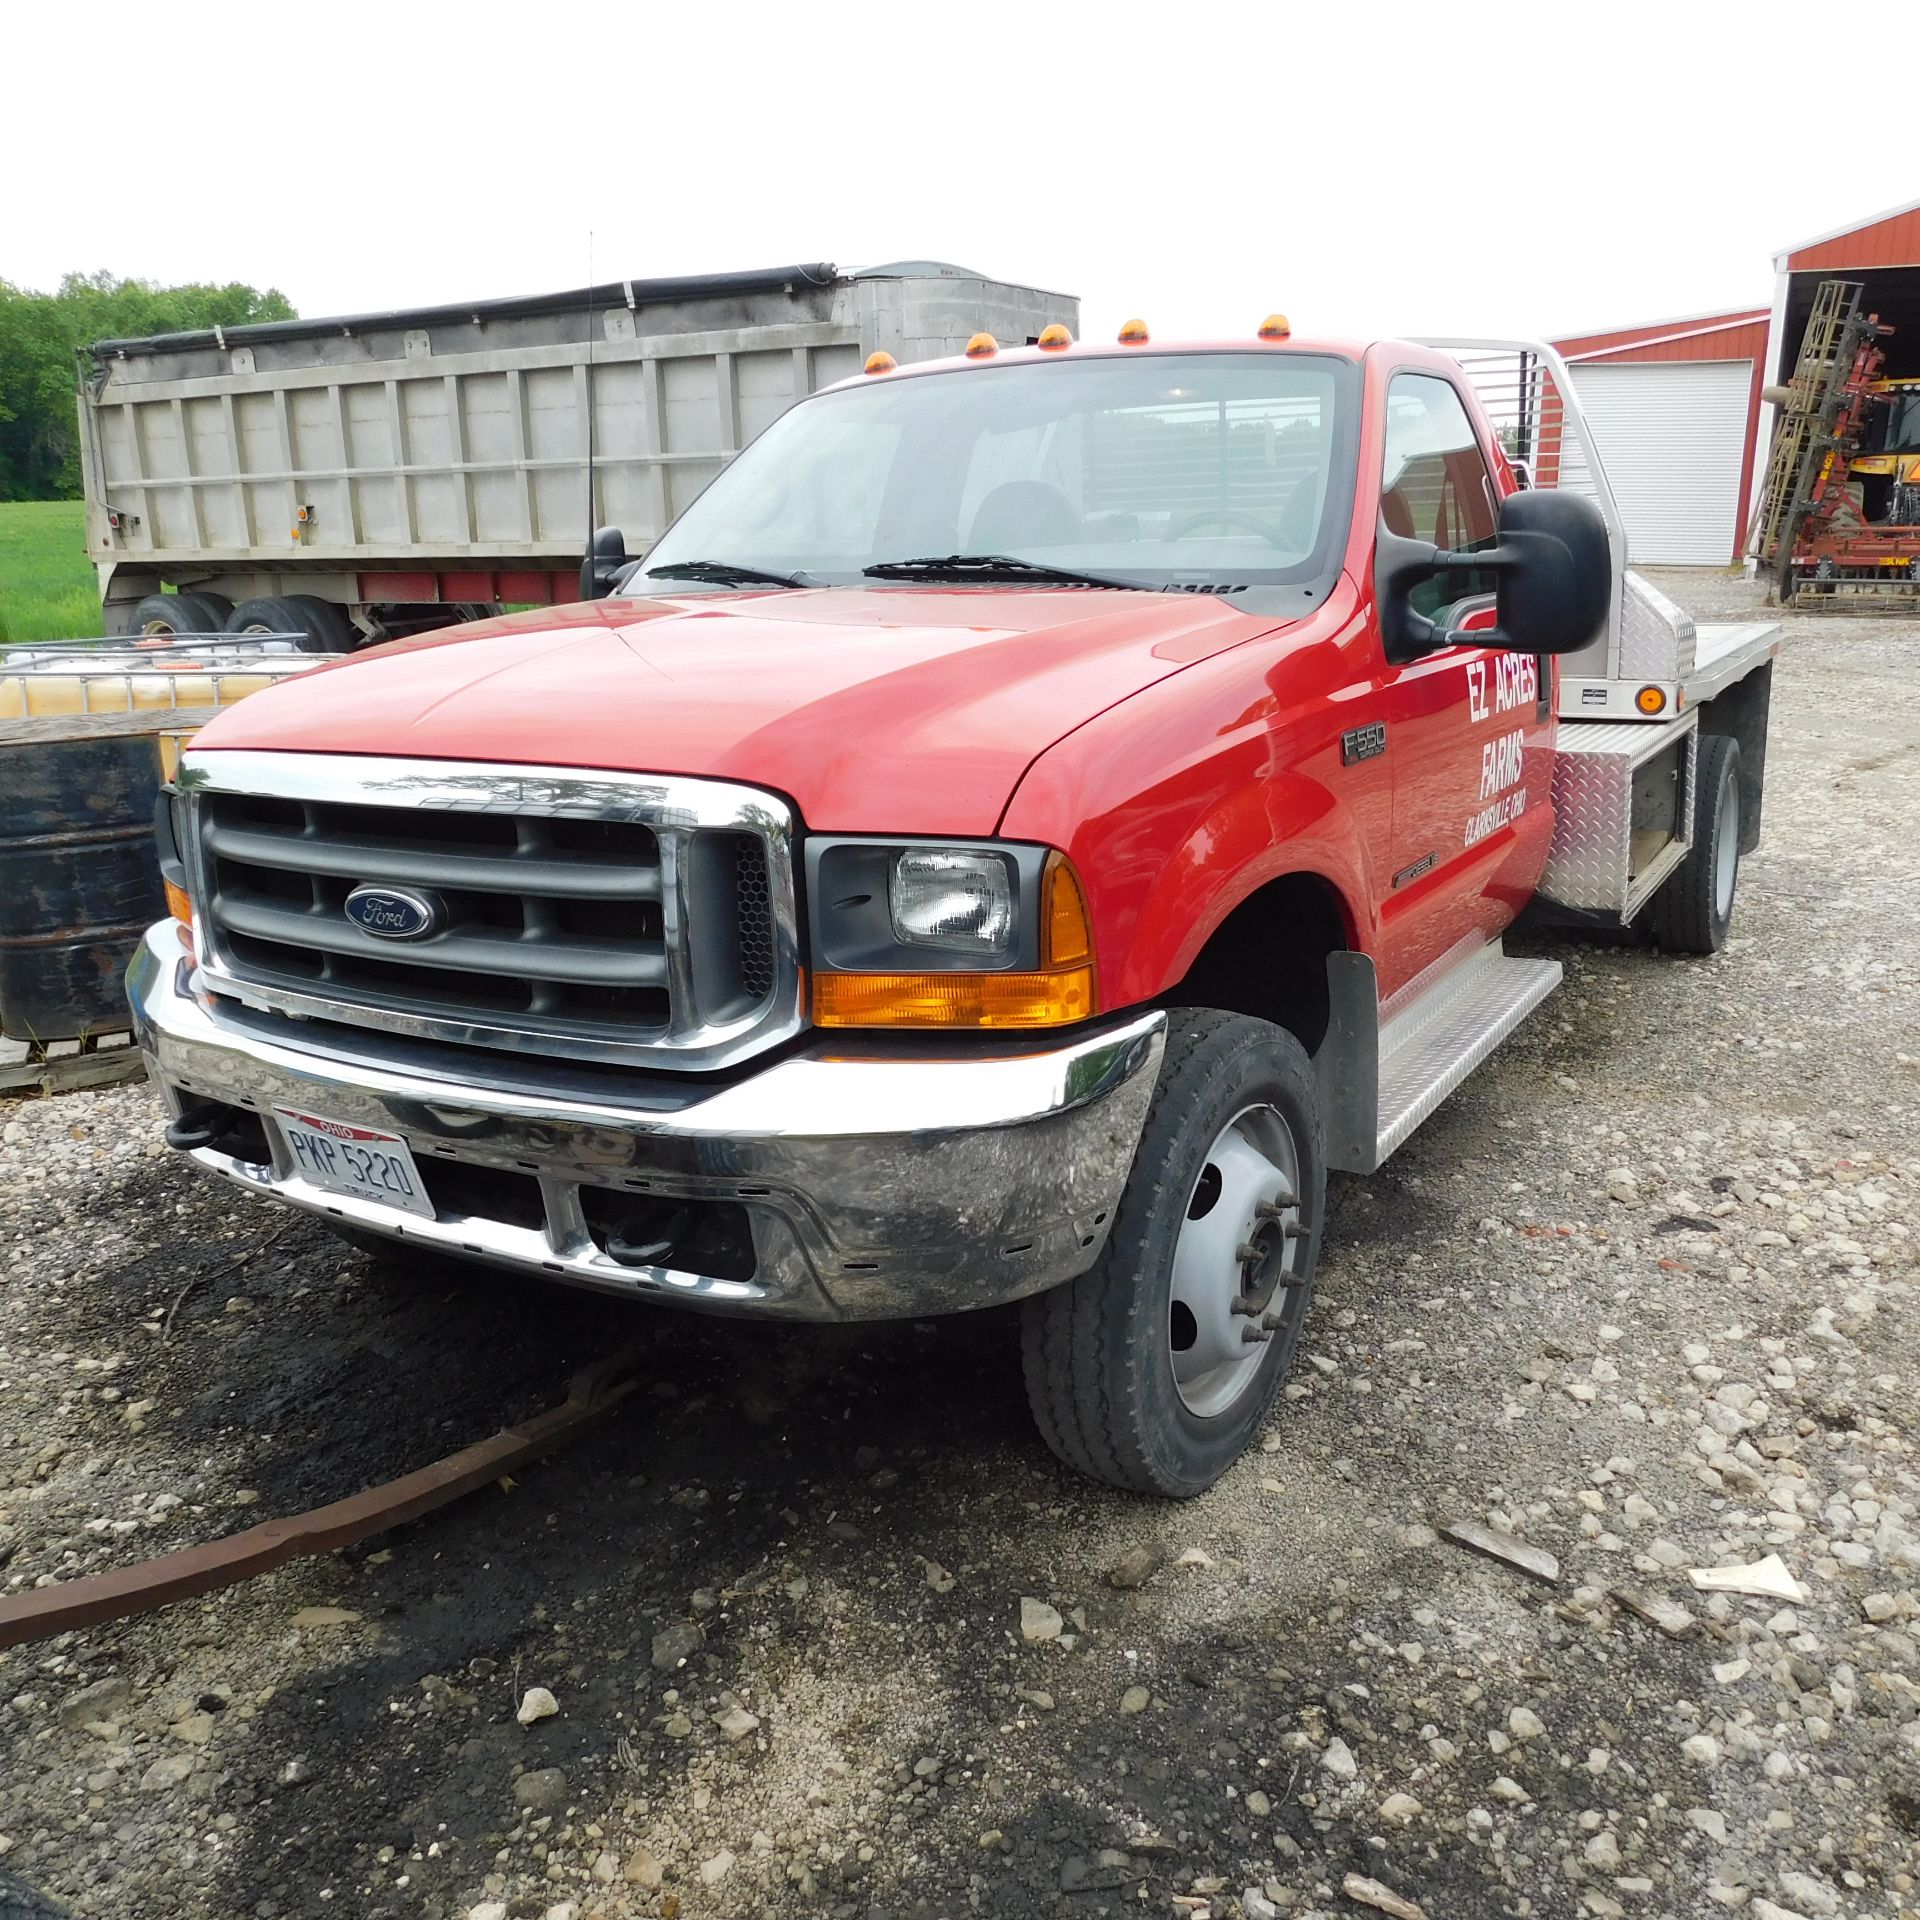 Ford Model F-550XL Super Duty Stake Bed Truck, New 2000, Electric Dump Bed, Dually, Power Stroke V8 - Image 12 of 37